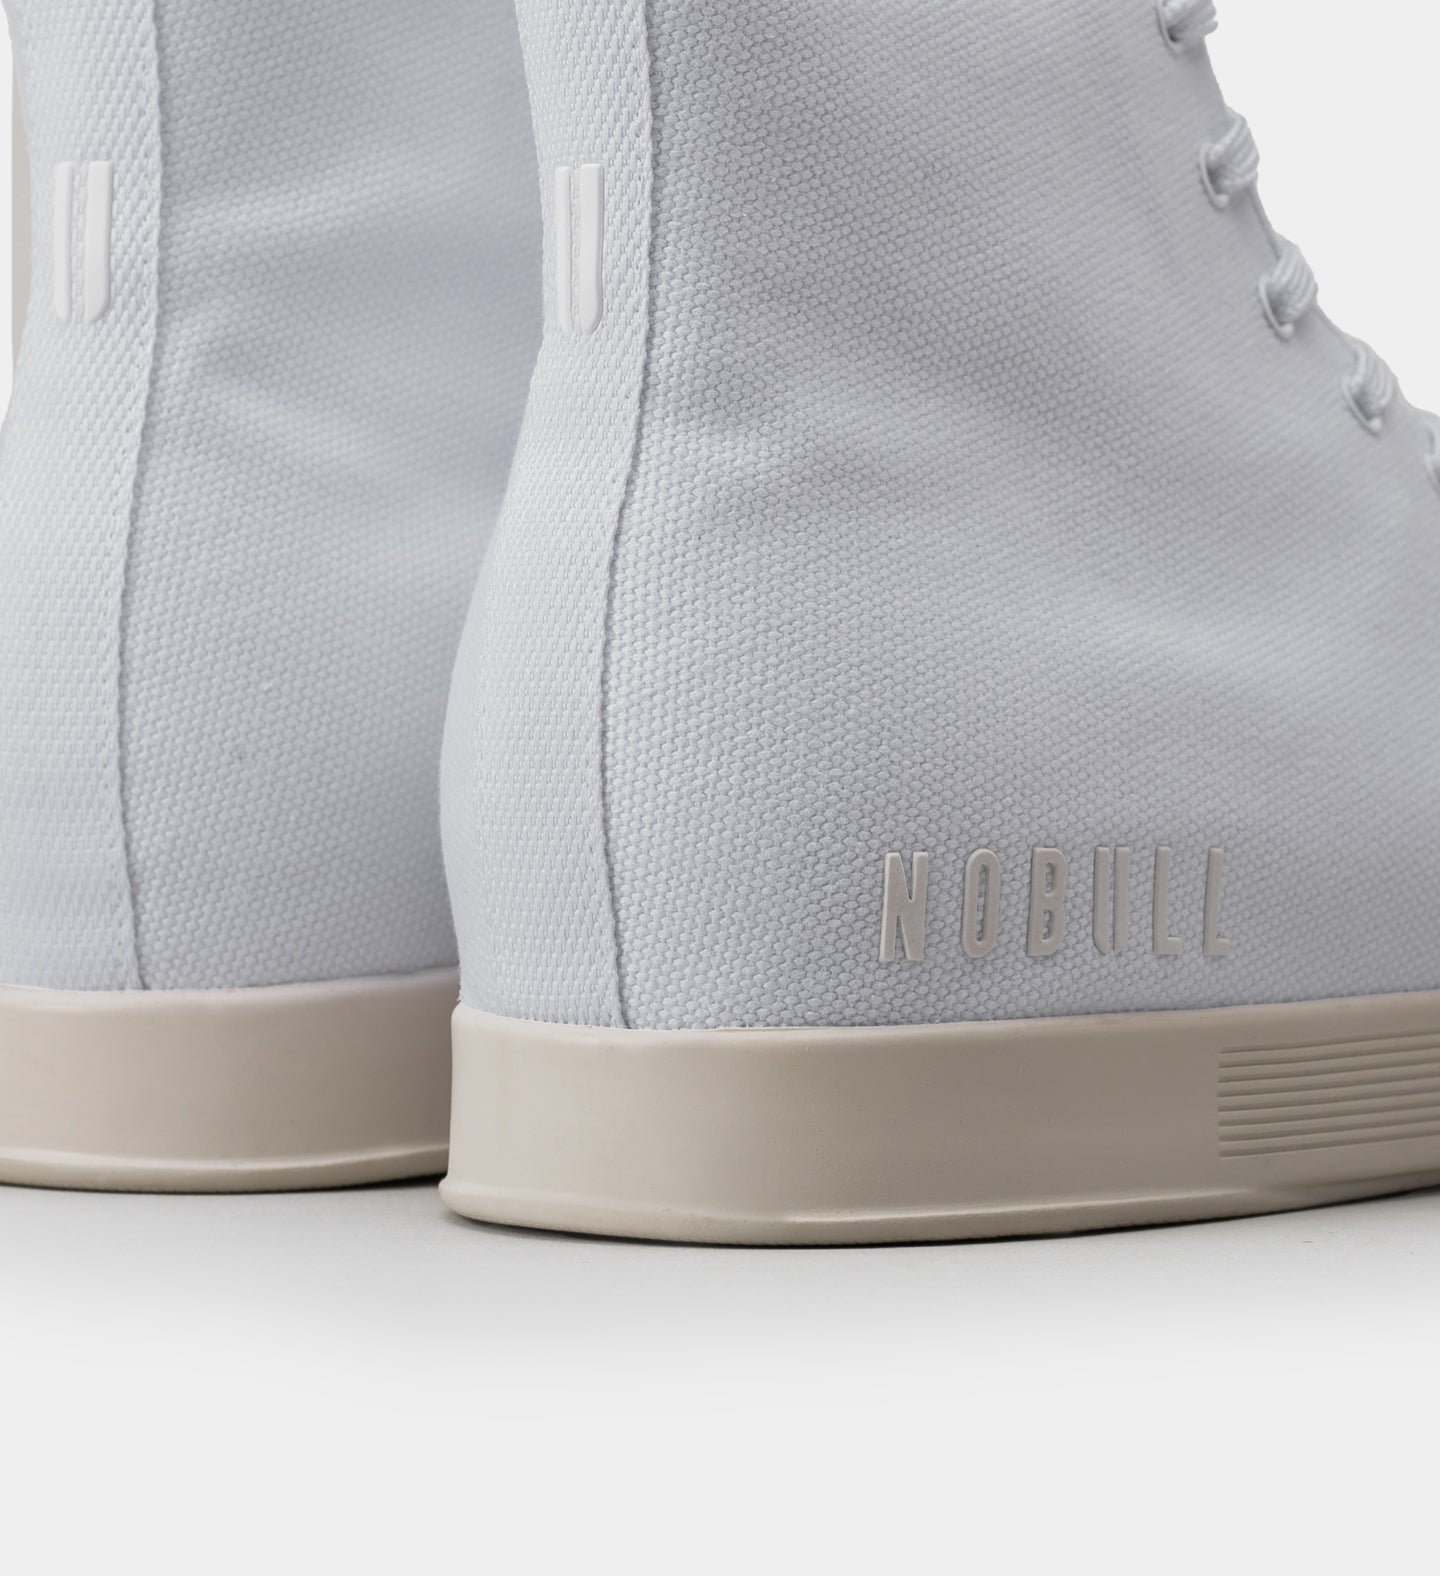 NOBULL High-Top Trainer - Black Heather / Off White